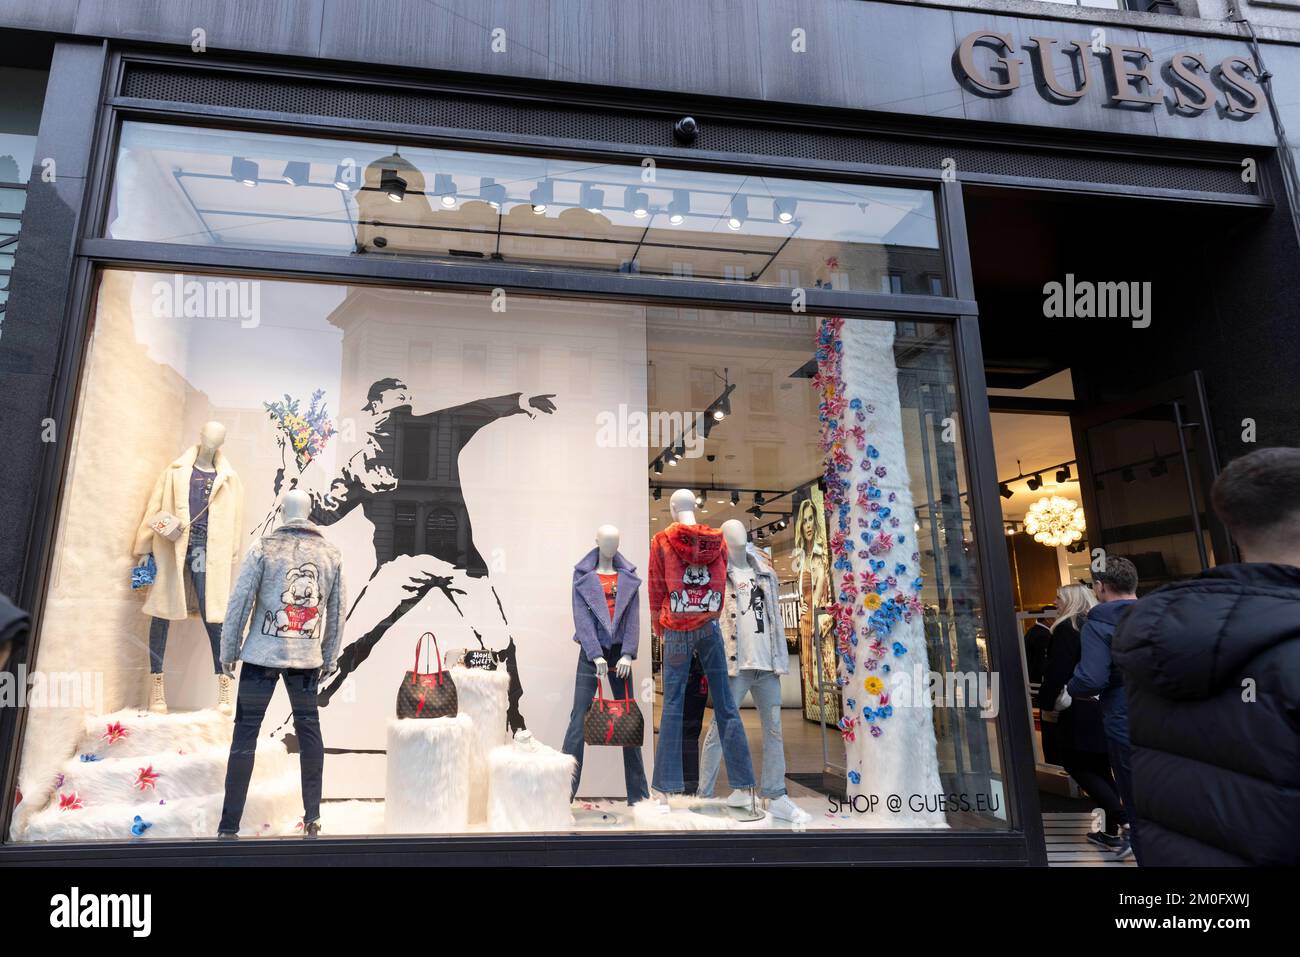 Guess store on Regent’s street is seen to have put Banksy art back up at the storefront. Banksy posted on Instagram yesterday accusing Guess of using Stock Photo